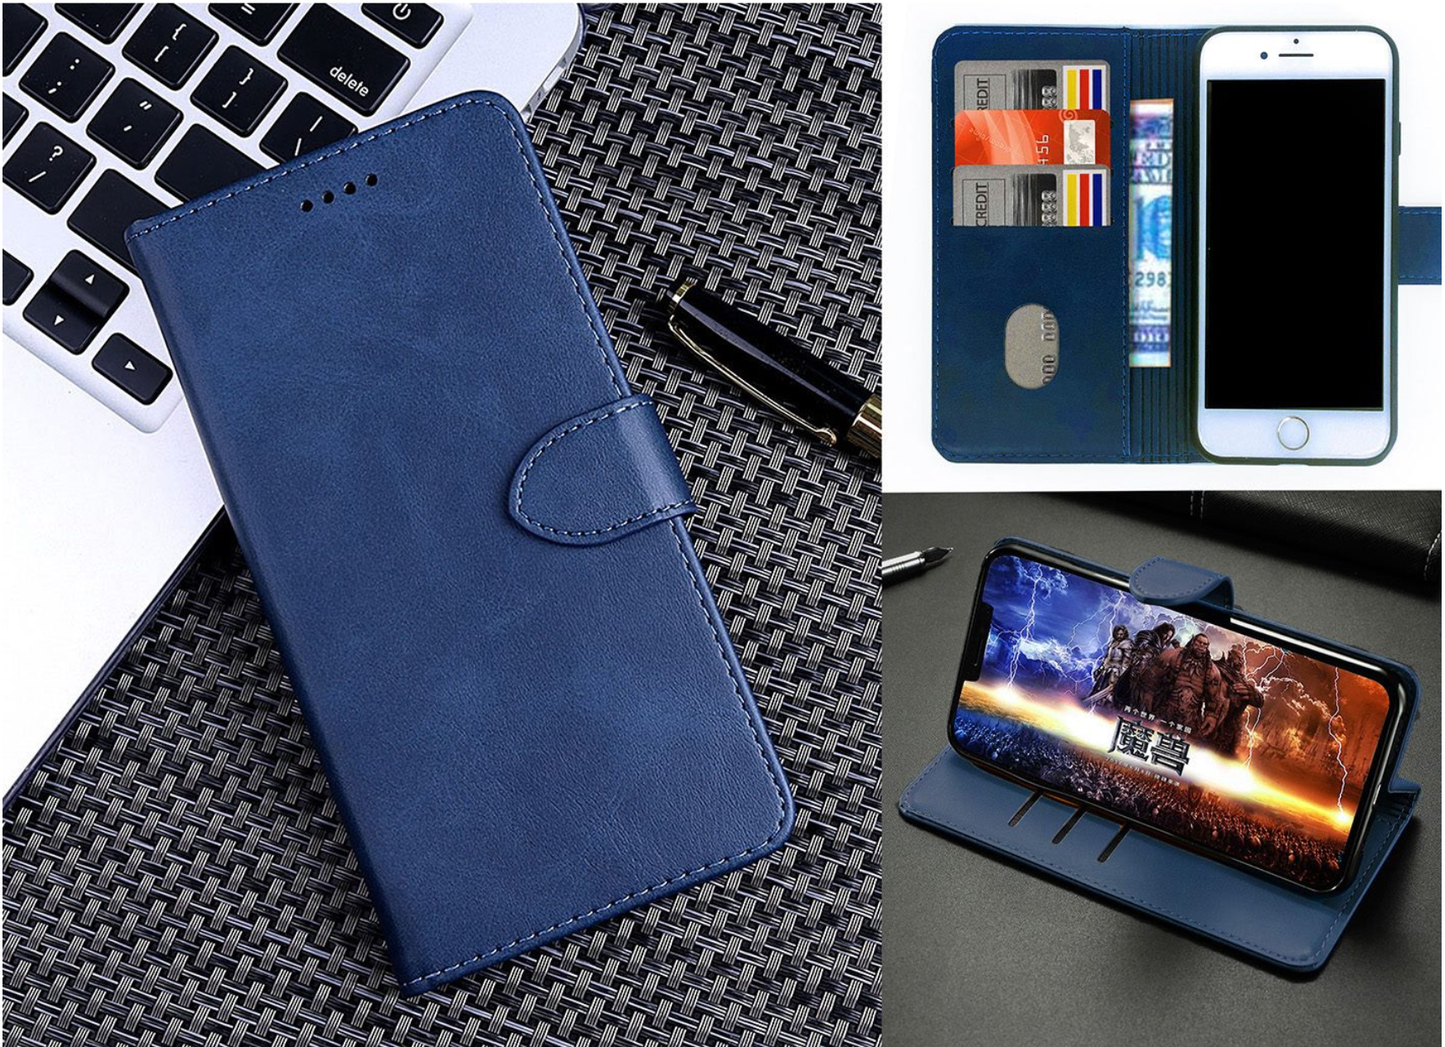 Samsung Galaxy S10 Plus Case Wallet Cover Blue